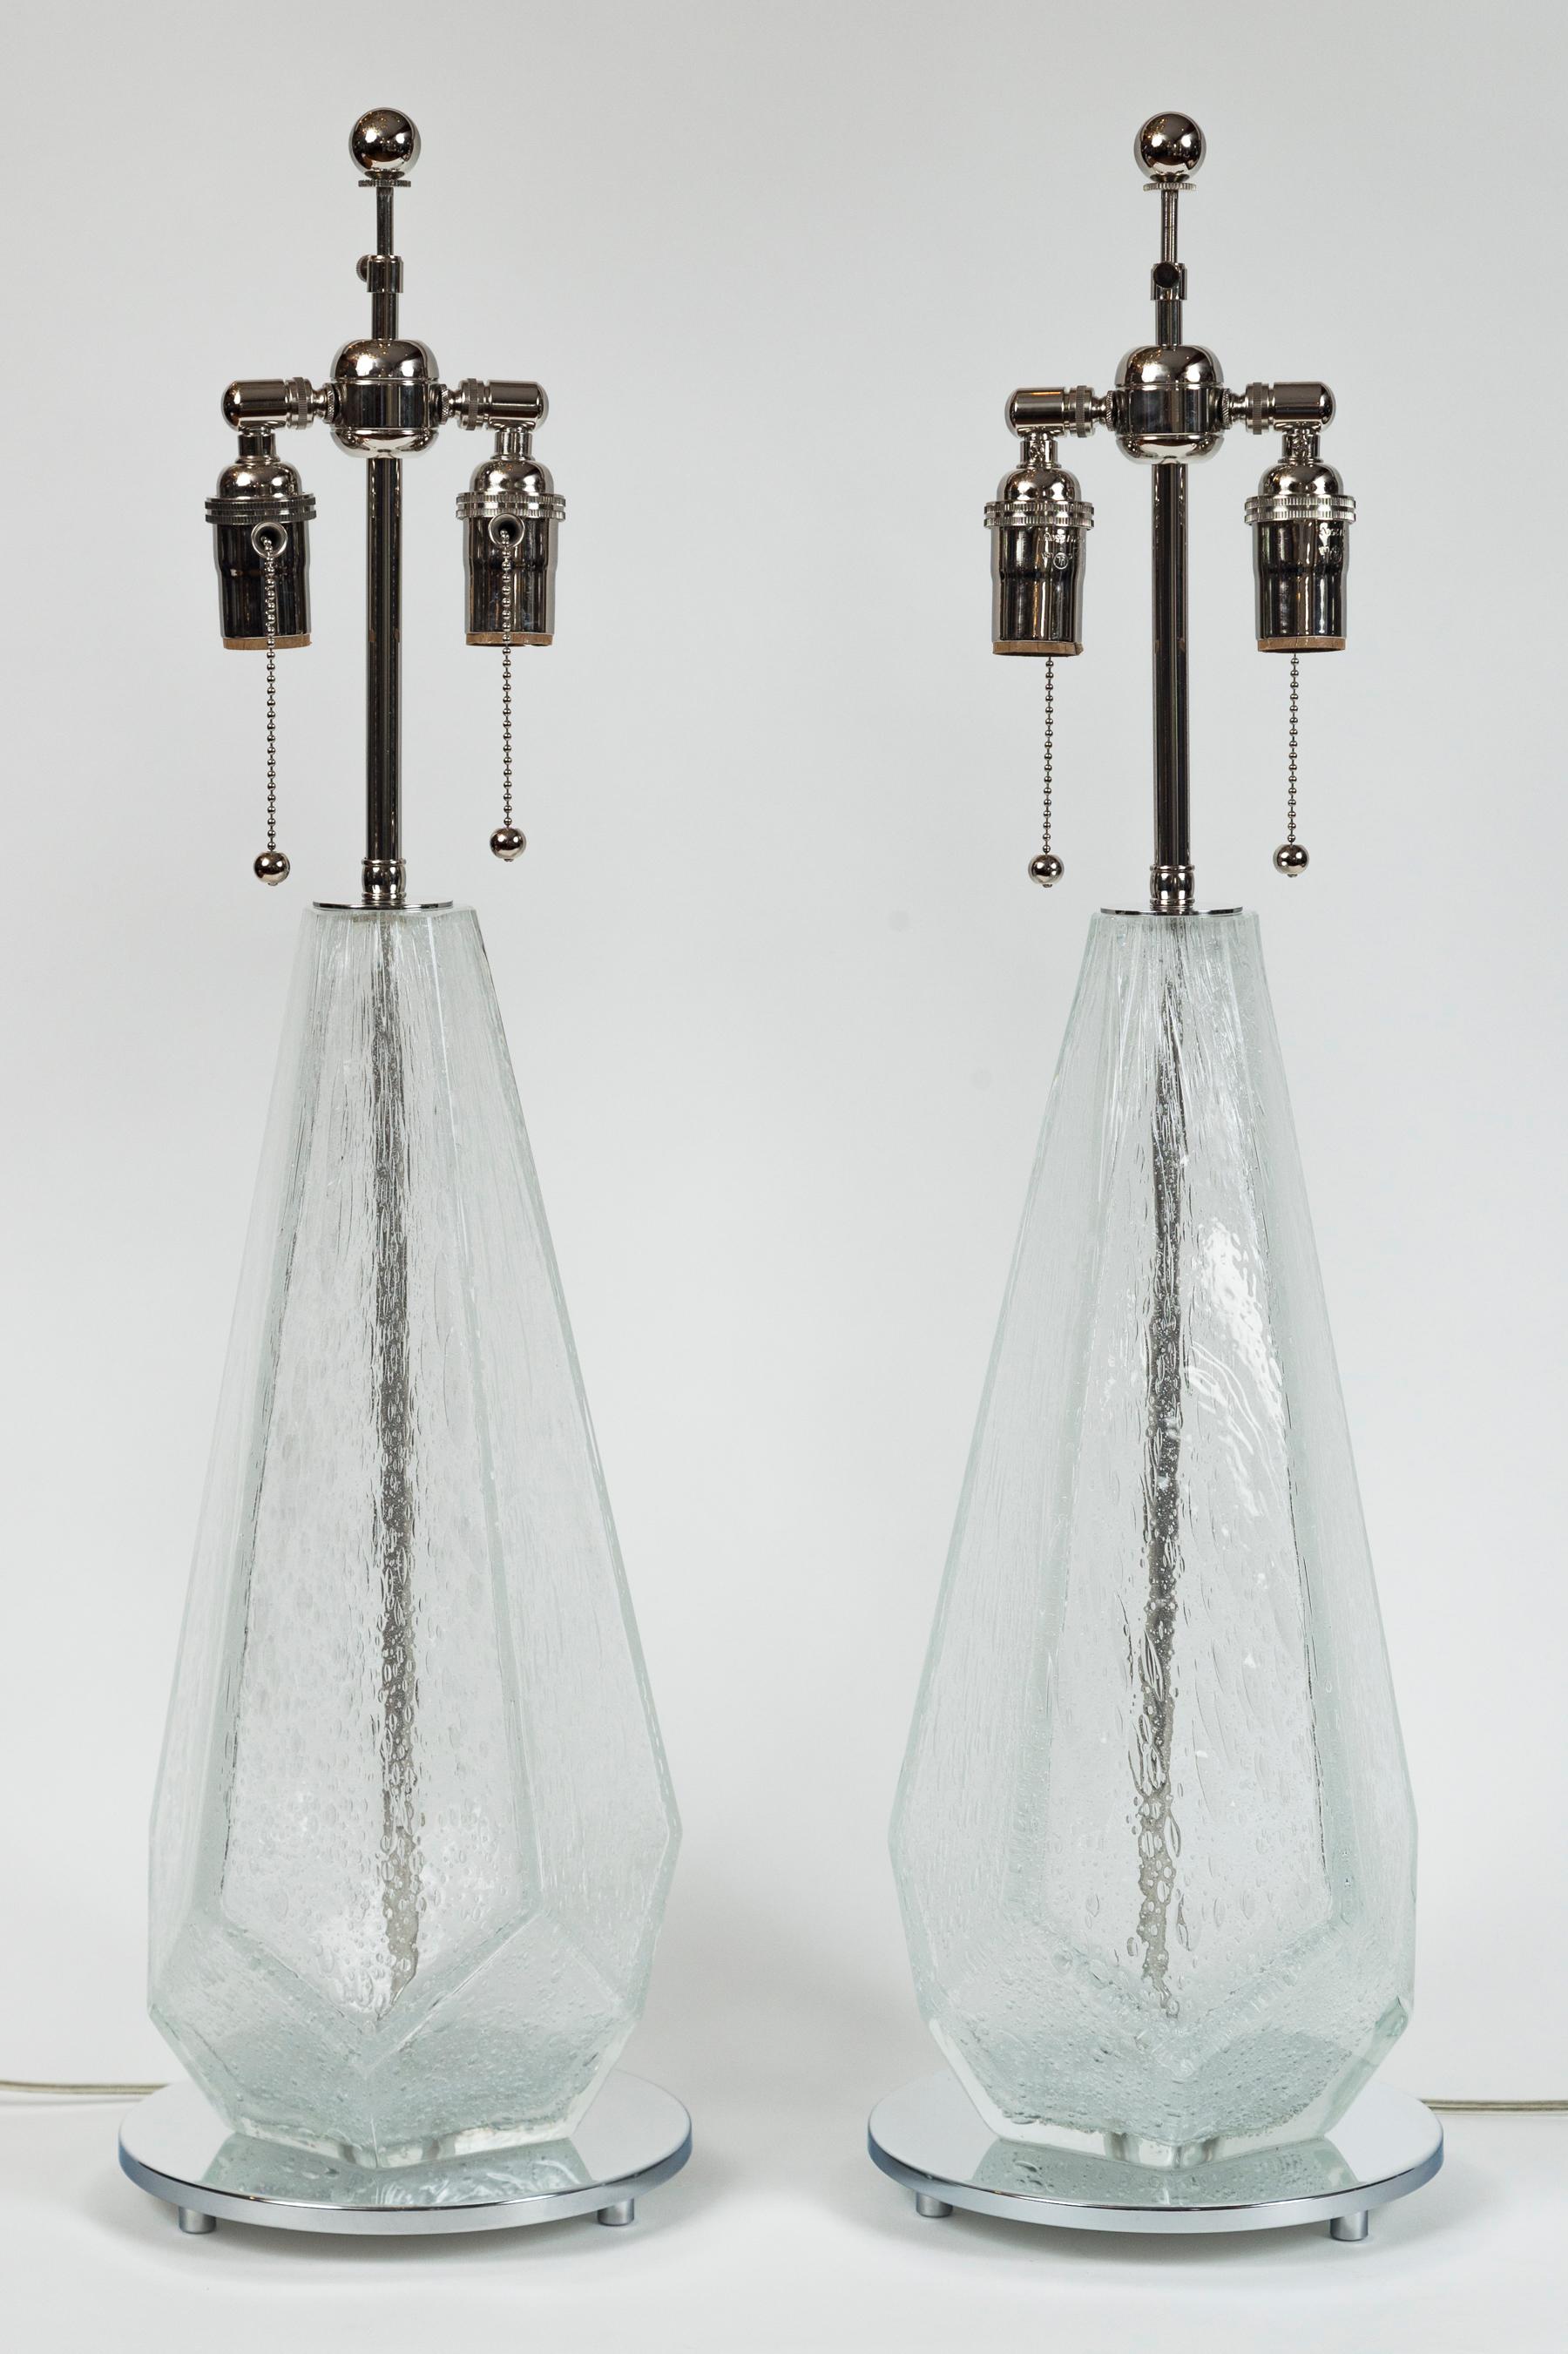 Elegant pair of of light white blown pulegoso  (white bubbles suspended in the glass) faceted table  lamps with nickel bases

Electrified to US code with nickel lamping, adjustable shade mechanism and 2 medium base sockets

*Heavy lamps 25lbs